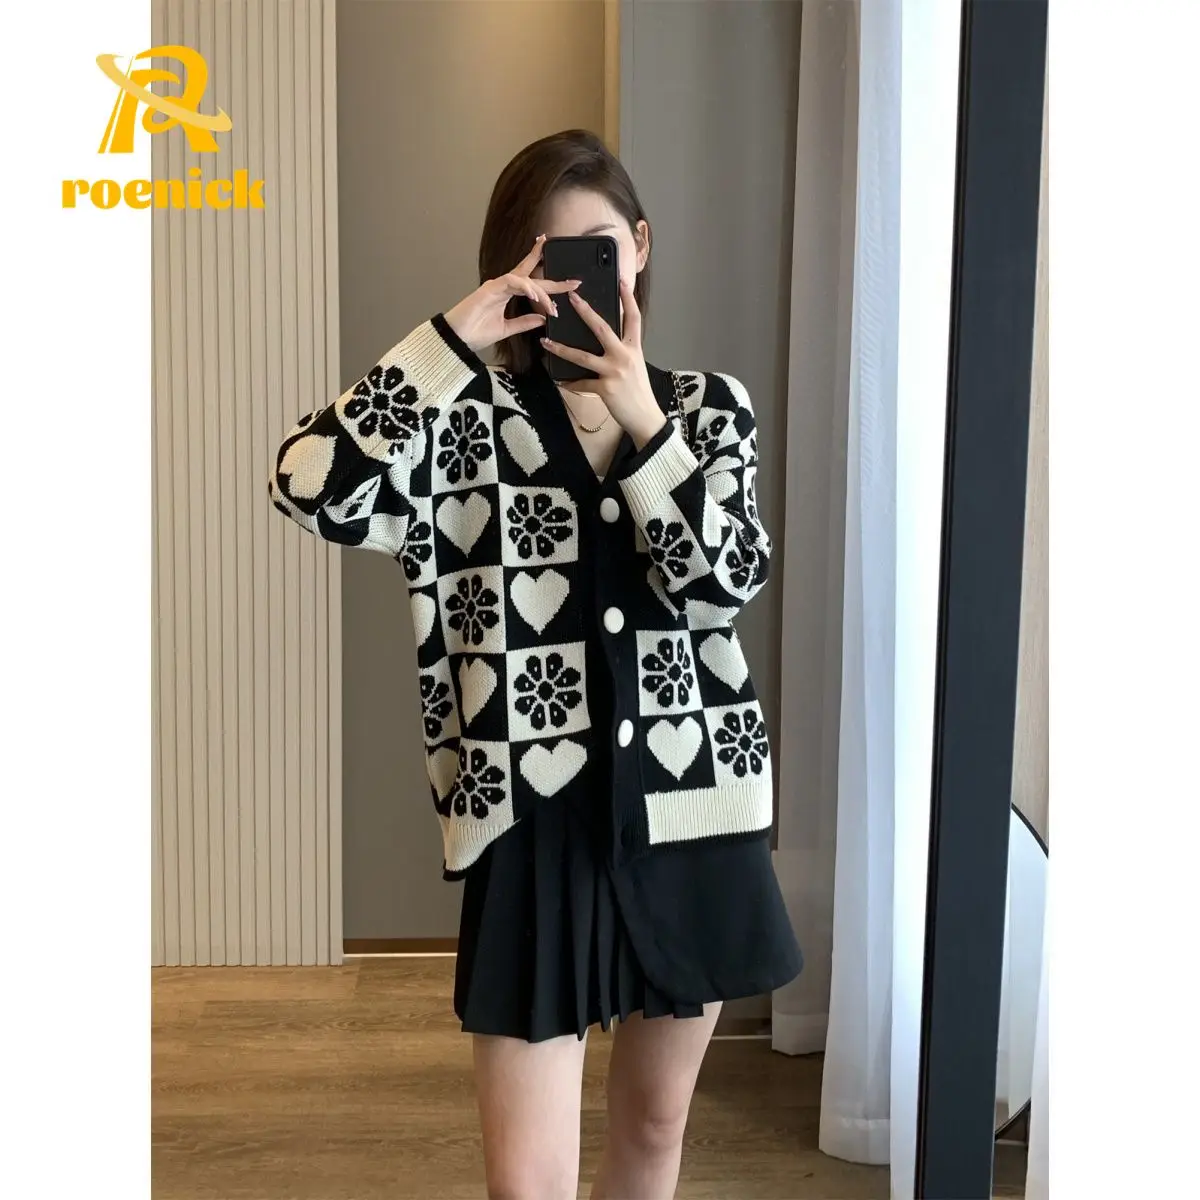 

ROENICK Women Fashion Jacquard Loose Knit Cardigans Sweaters Vintage Long Sleeve Knitwears Covered Buttons Outerwear Chic Tops